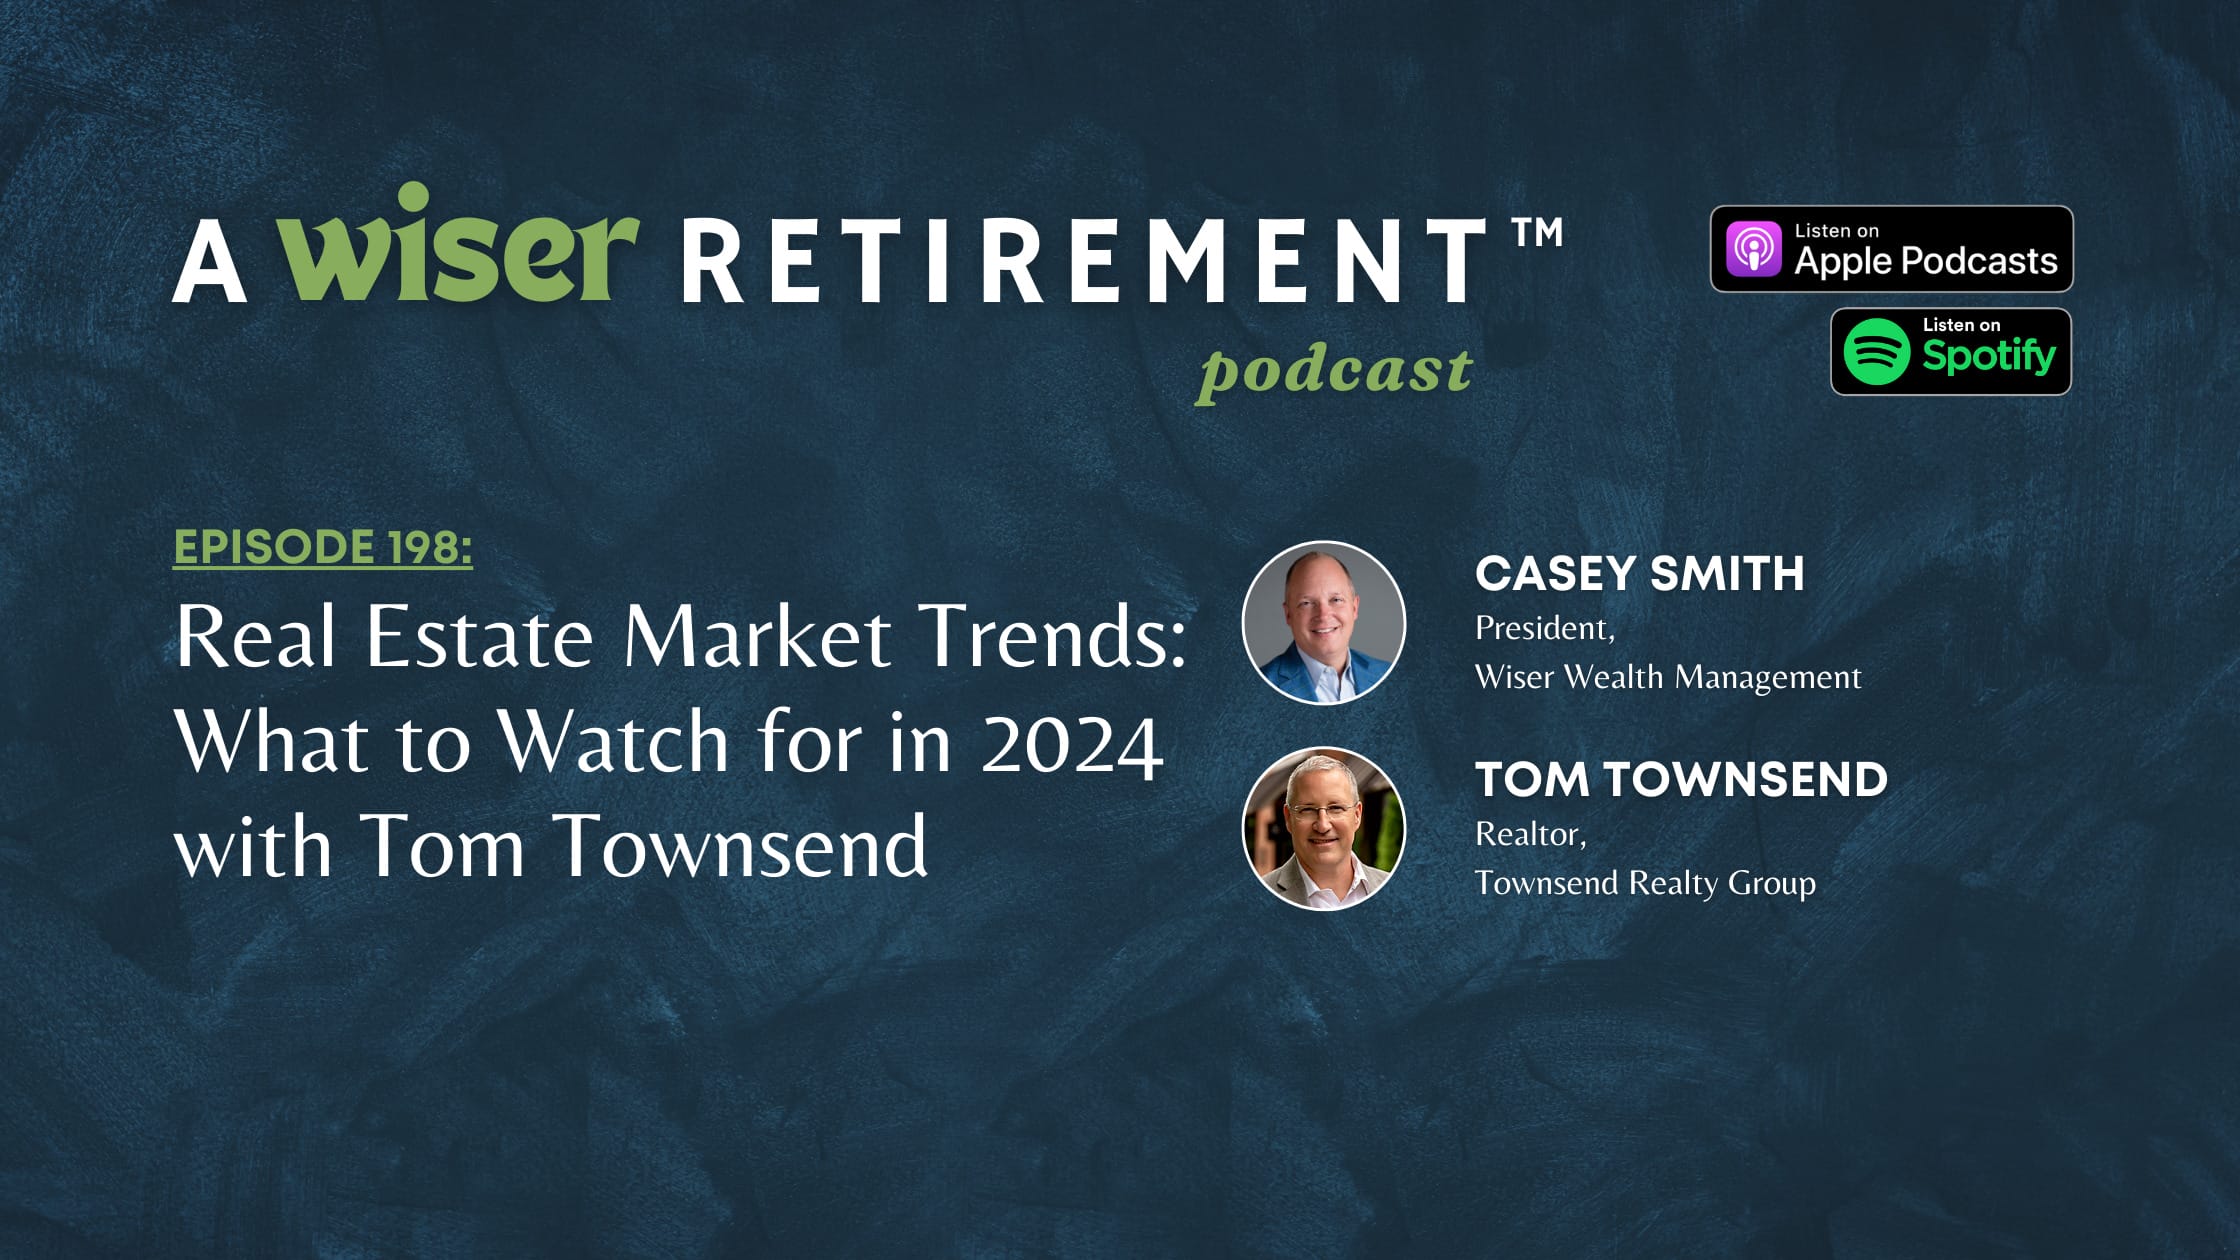 Real Estate Market Trends: What to Watch for in 2024 with Tom Townsend